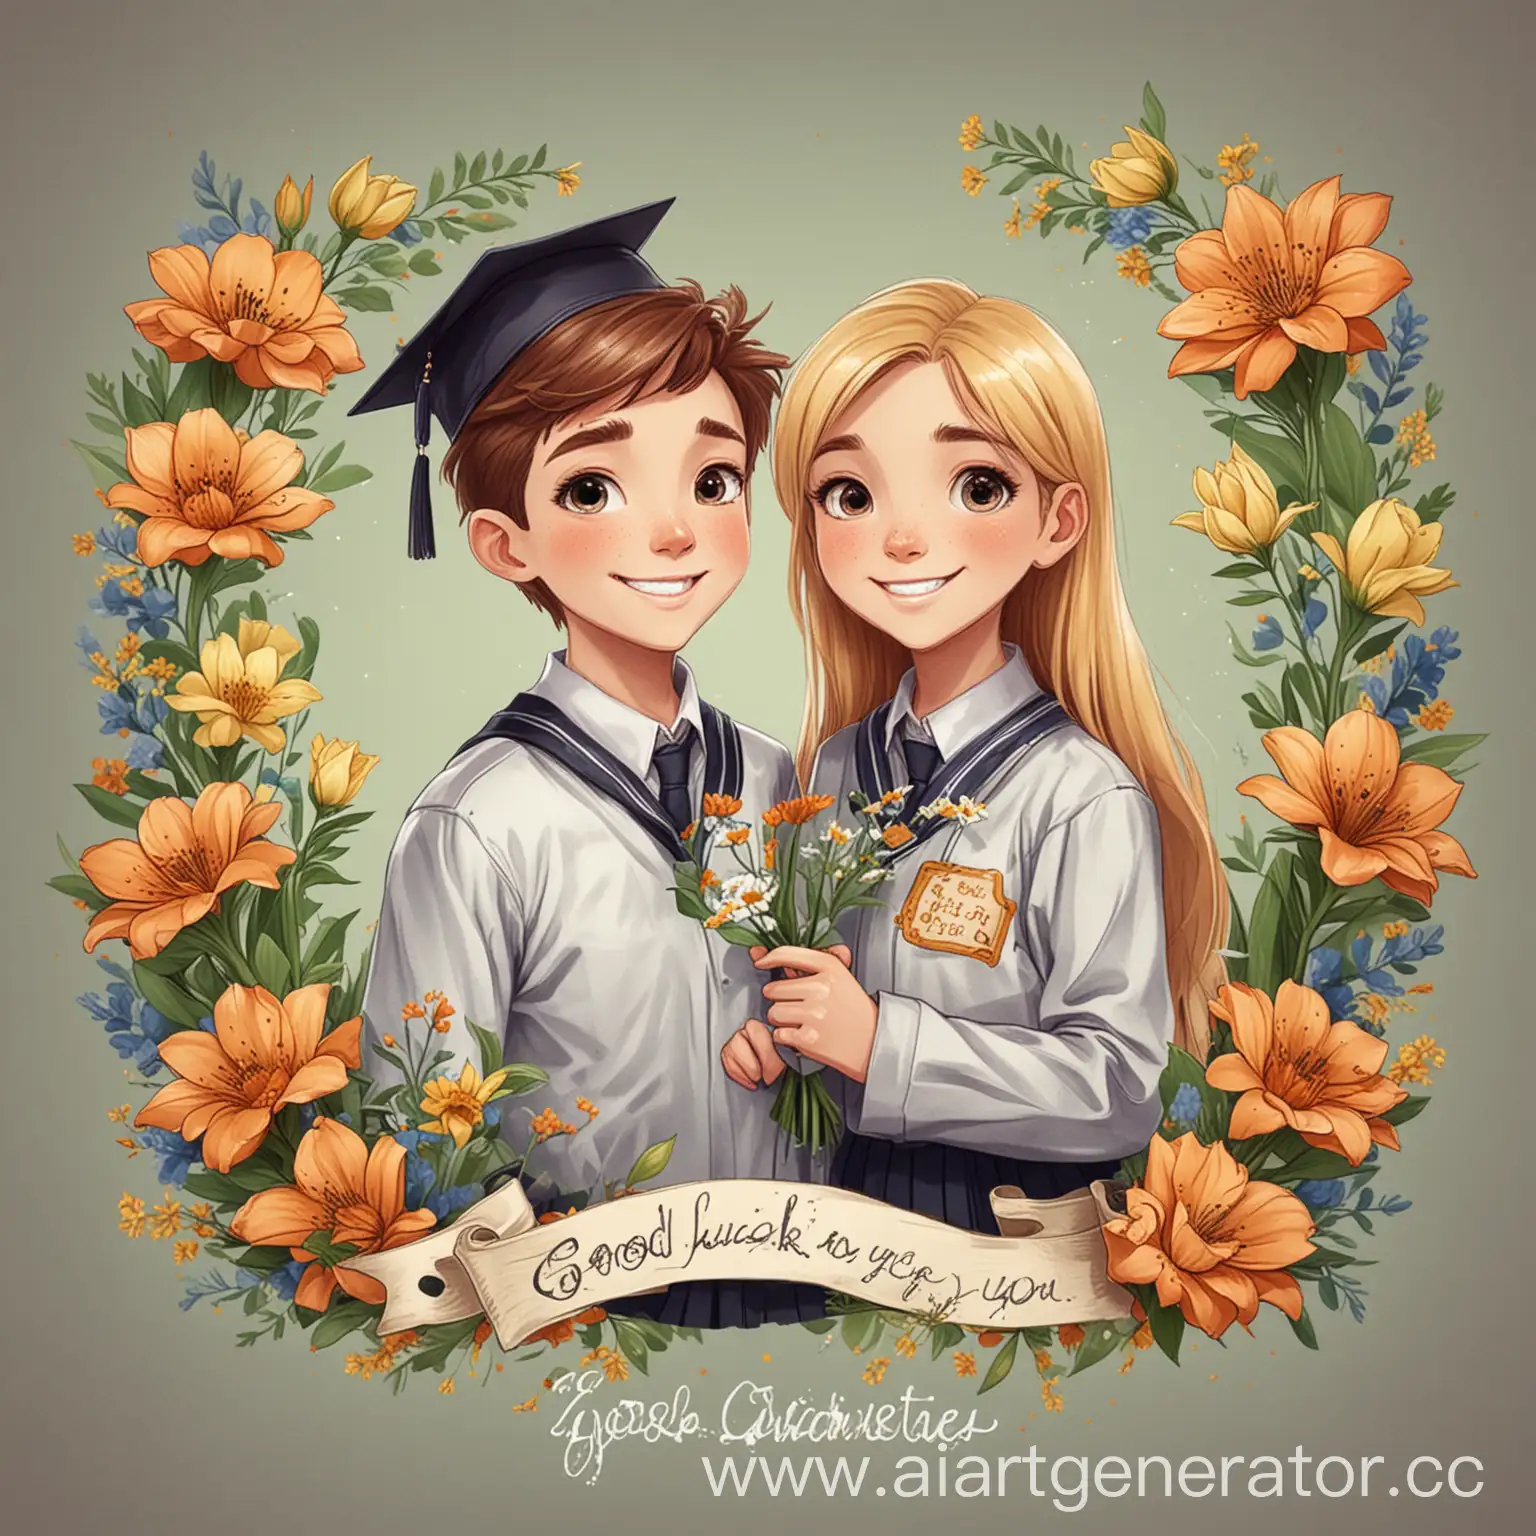 Draw a guy and a girl in a school uniform and with flowers. Add the inscription "Good luck to you, graduates"